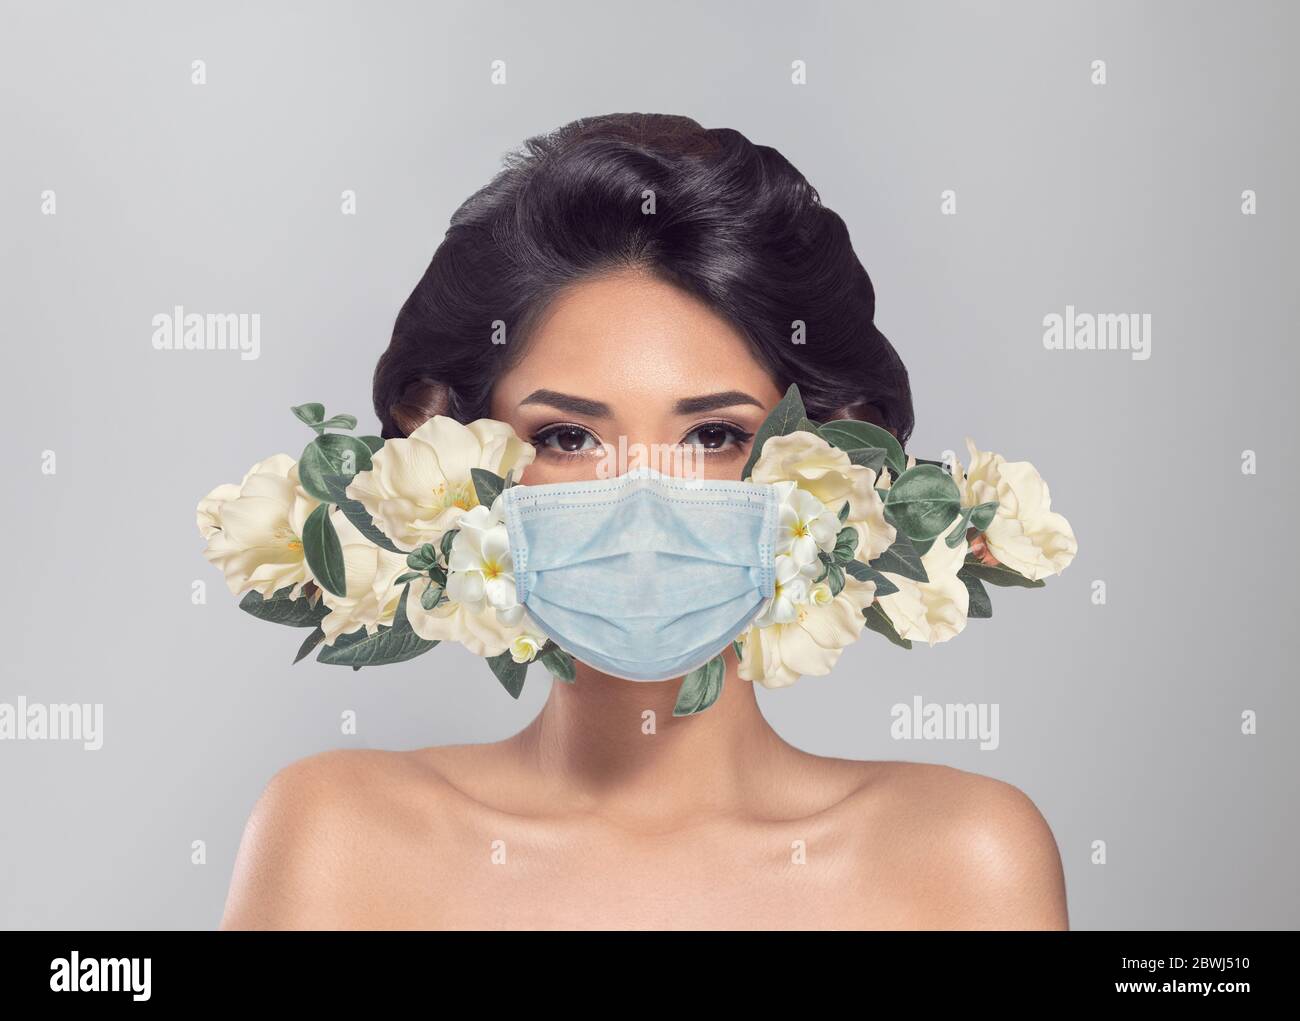 Abstract fashion portrait of woman in protective medical mask with flowers Stock Photo